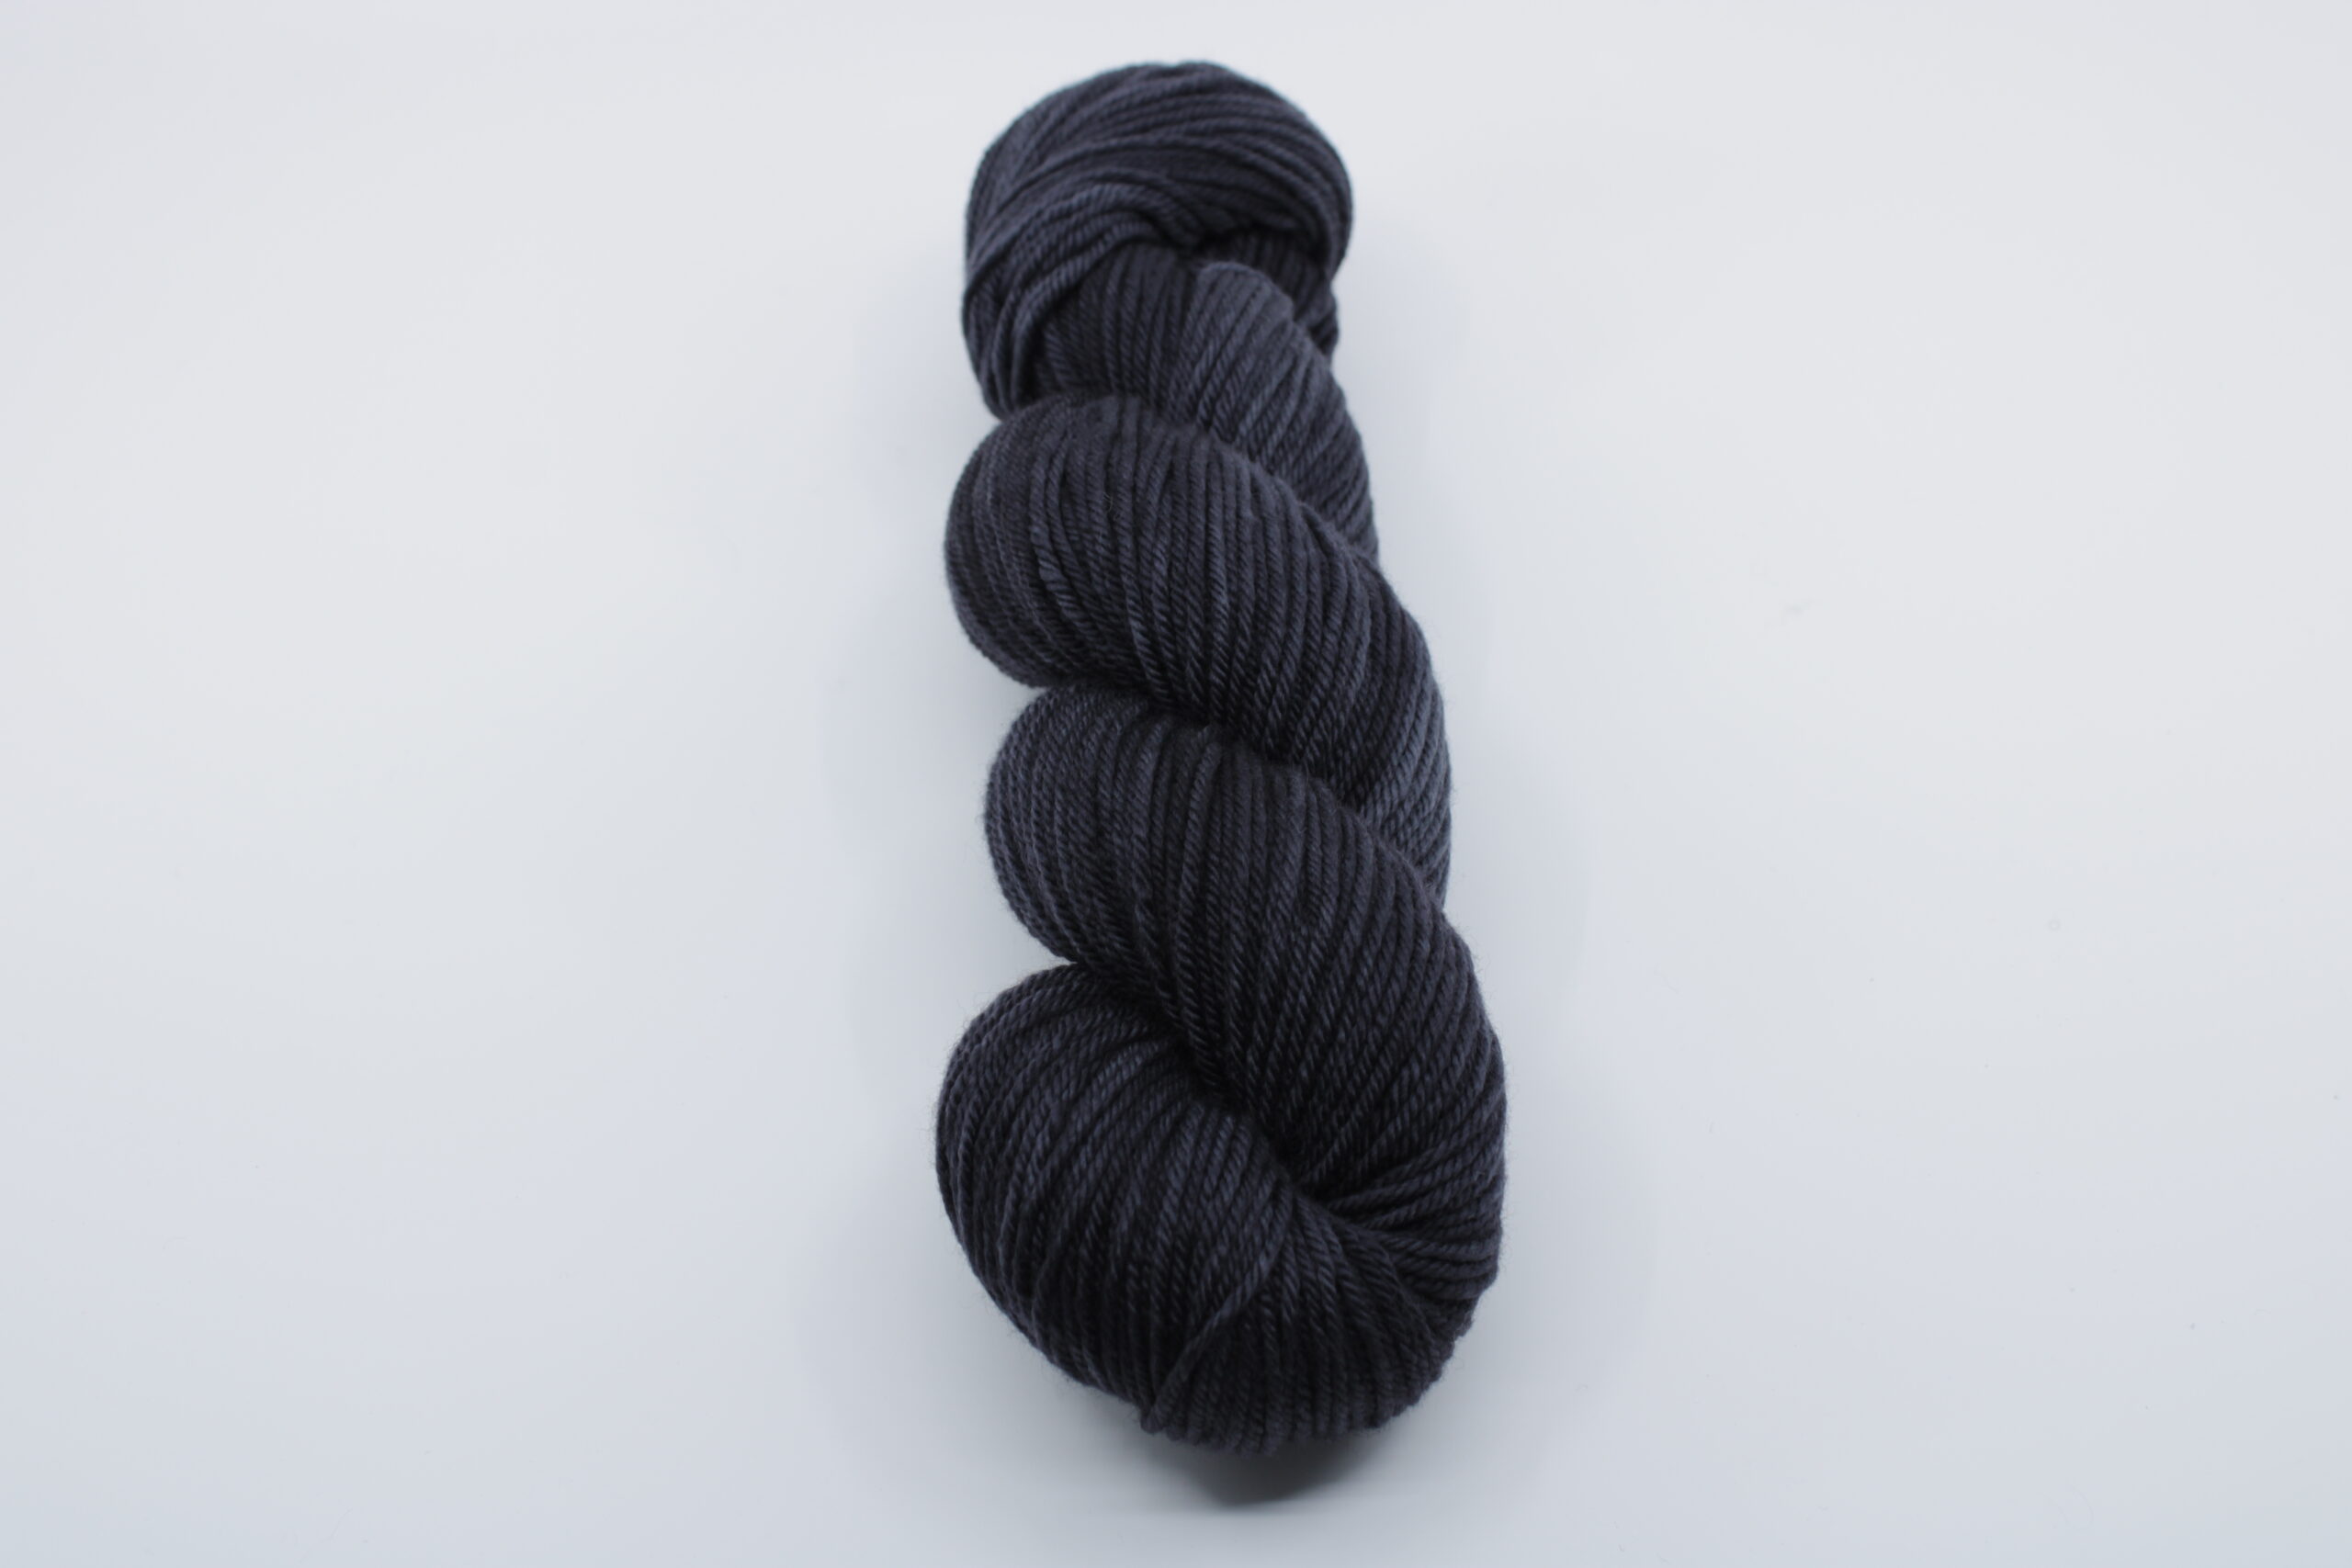 Folcon worsted base. Wool 100% untreated merino. Trio of colors: Almost black. Color: Storm.